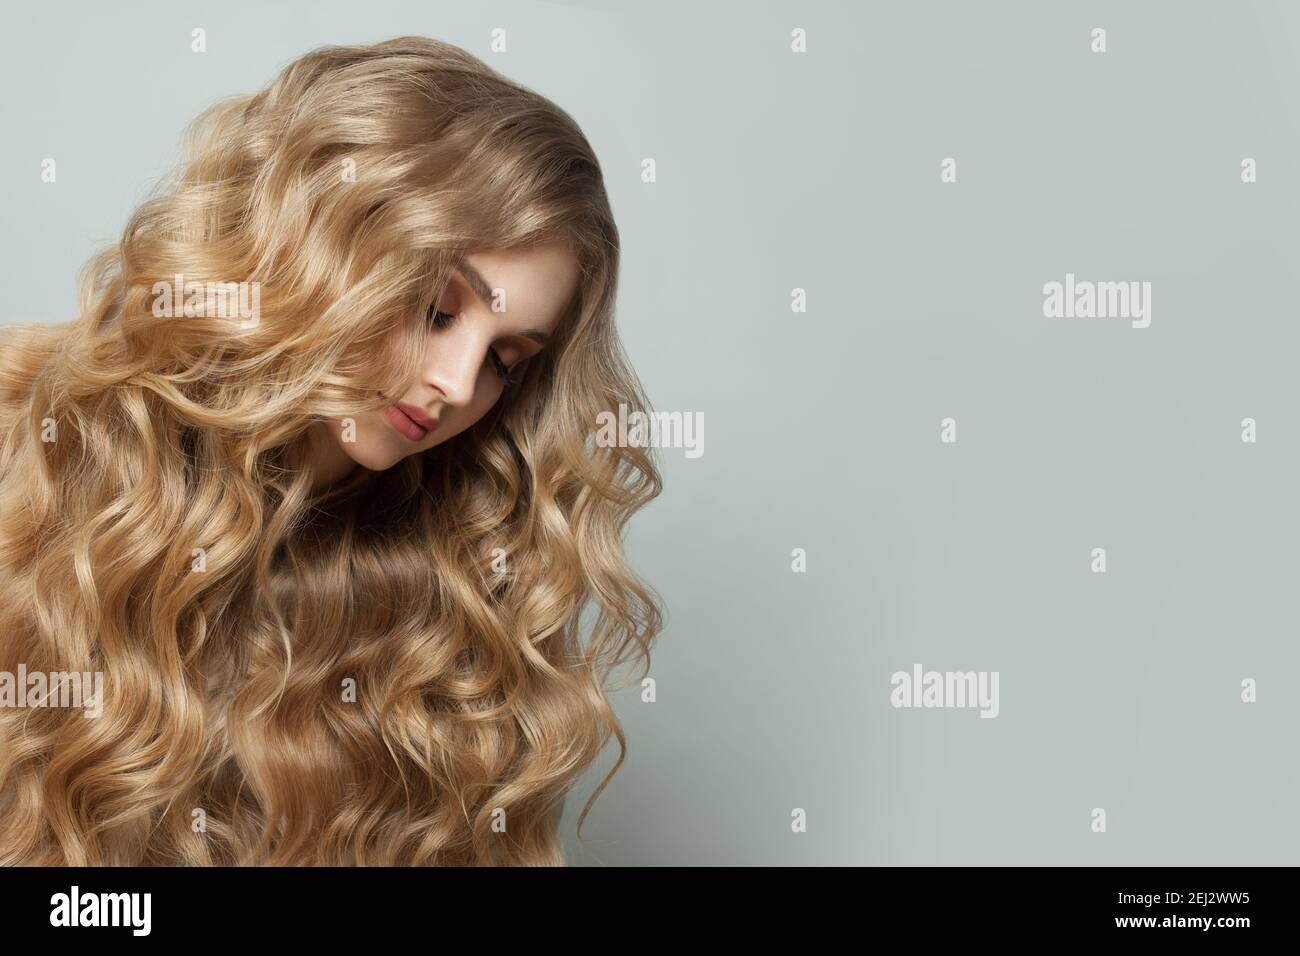 Blond hair woman on white banner background Stock Photo